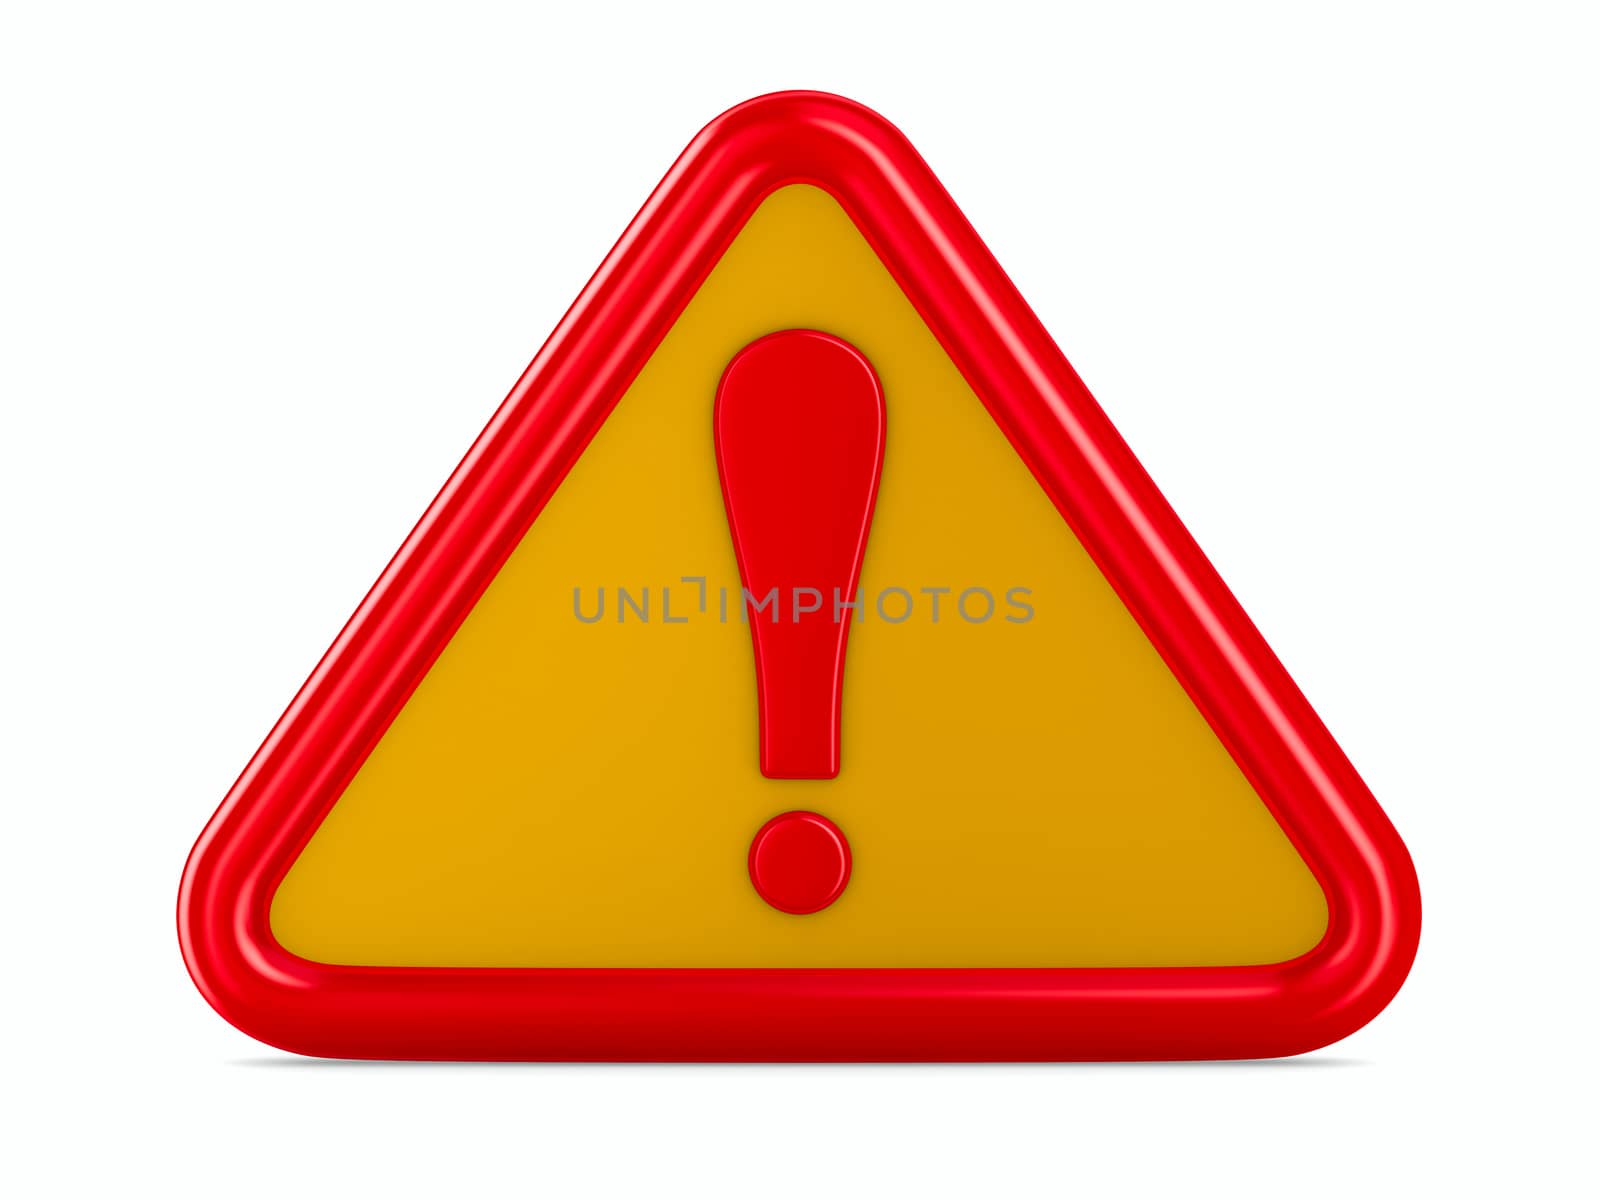 Attention. traffic sign on white background. Isolated 3D image